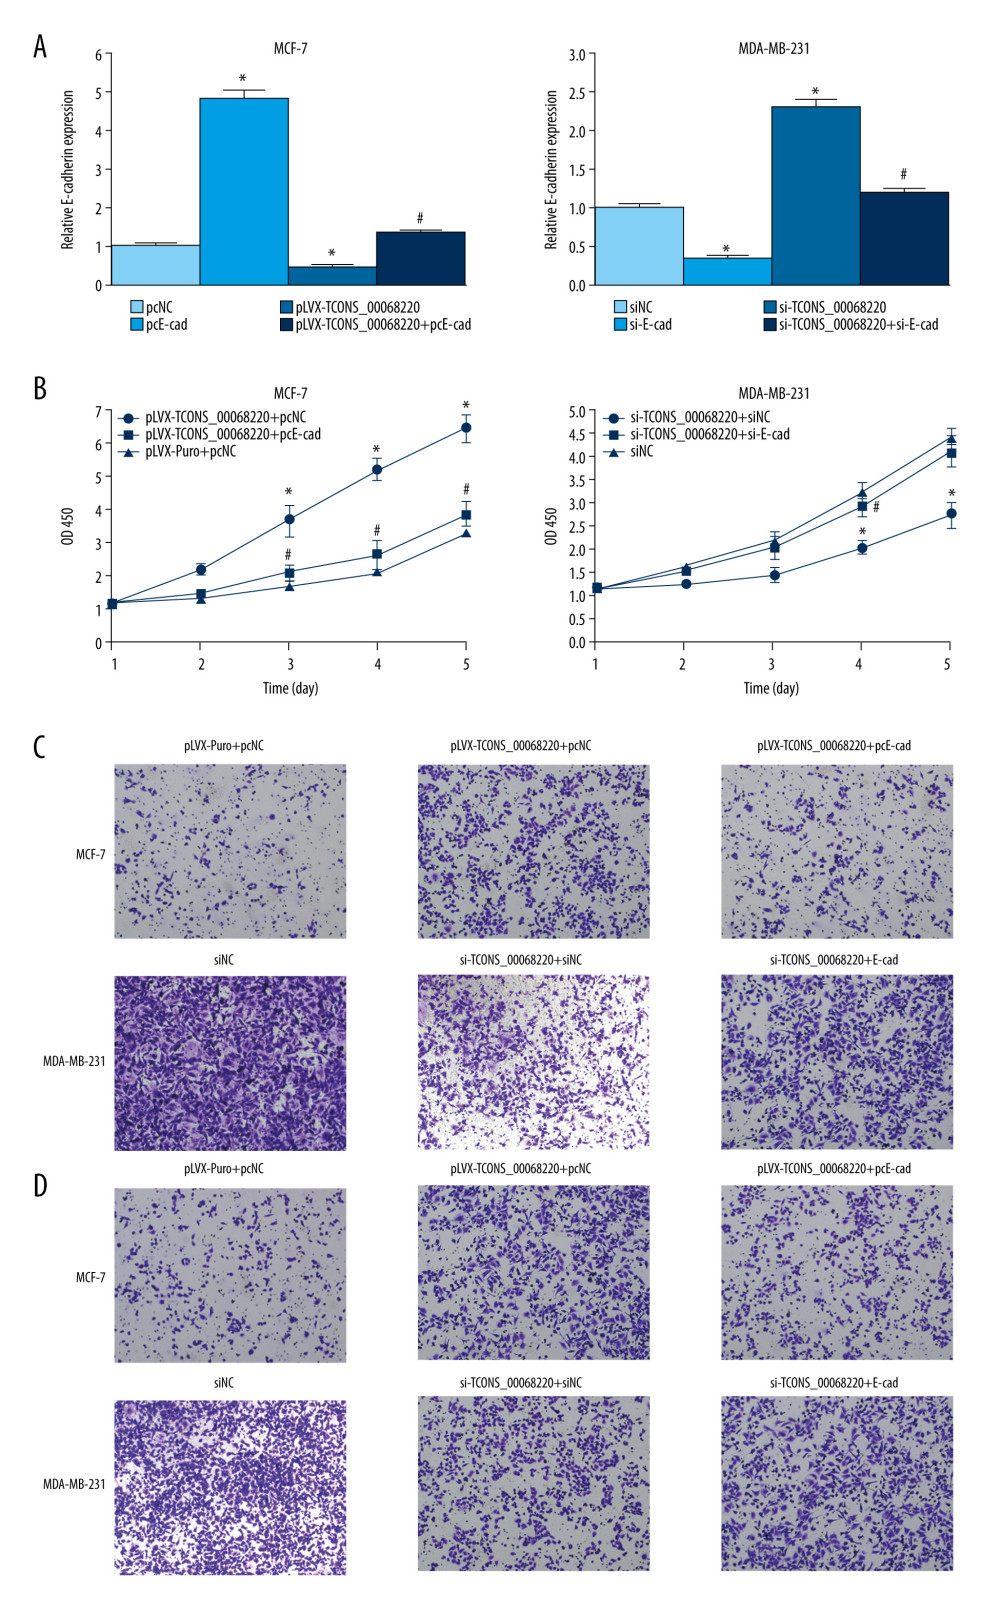 TCONS_00068220 modulates breast cancer cell performance by downregulating E-cadherin. E-cadherin was overexpressed in pLVX-TCONS_00068220-transfected MCF-7 cells, while E-cadherin was silenced in MDA-MB-231 cells with TCONS_00068220 knockdown. (A) Assessment of the overexpression of E-cadherin by using qRT-PCR. (B) Cell viability was evaluated using the CCK8 assay. (C) Cell migration was measured by transwell assay. (D) Cell invasion was tested by Matrigel transwell assay. * P<0.05 vs negative control (NC) group; # P<0.05 vs pLVX-TCONS_00068220+pcDNA3.1-NC group or si-TCONS_00068220+si-NC.